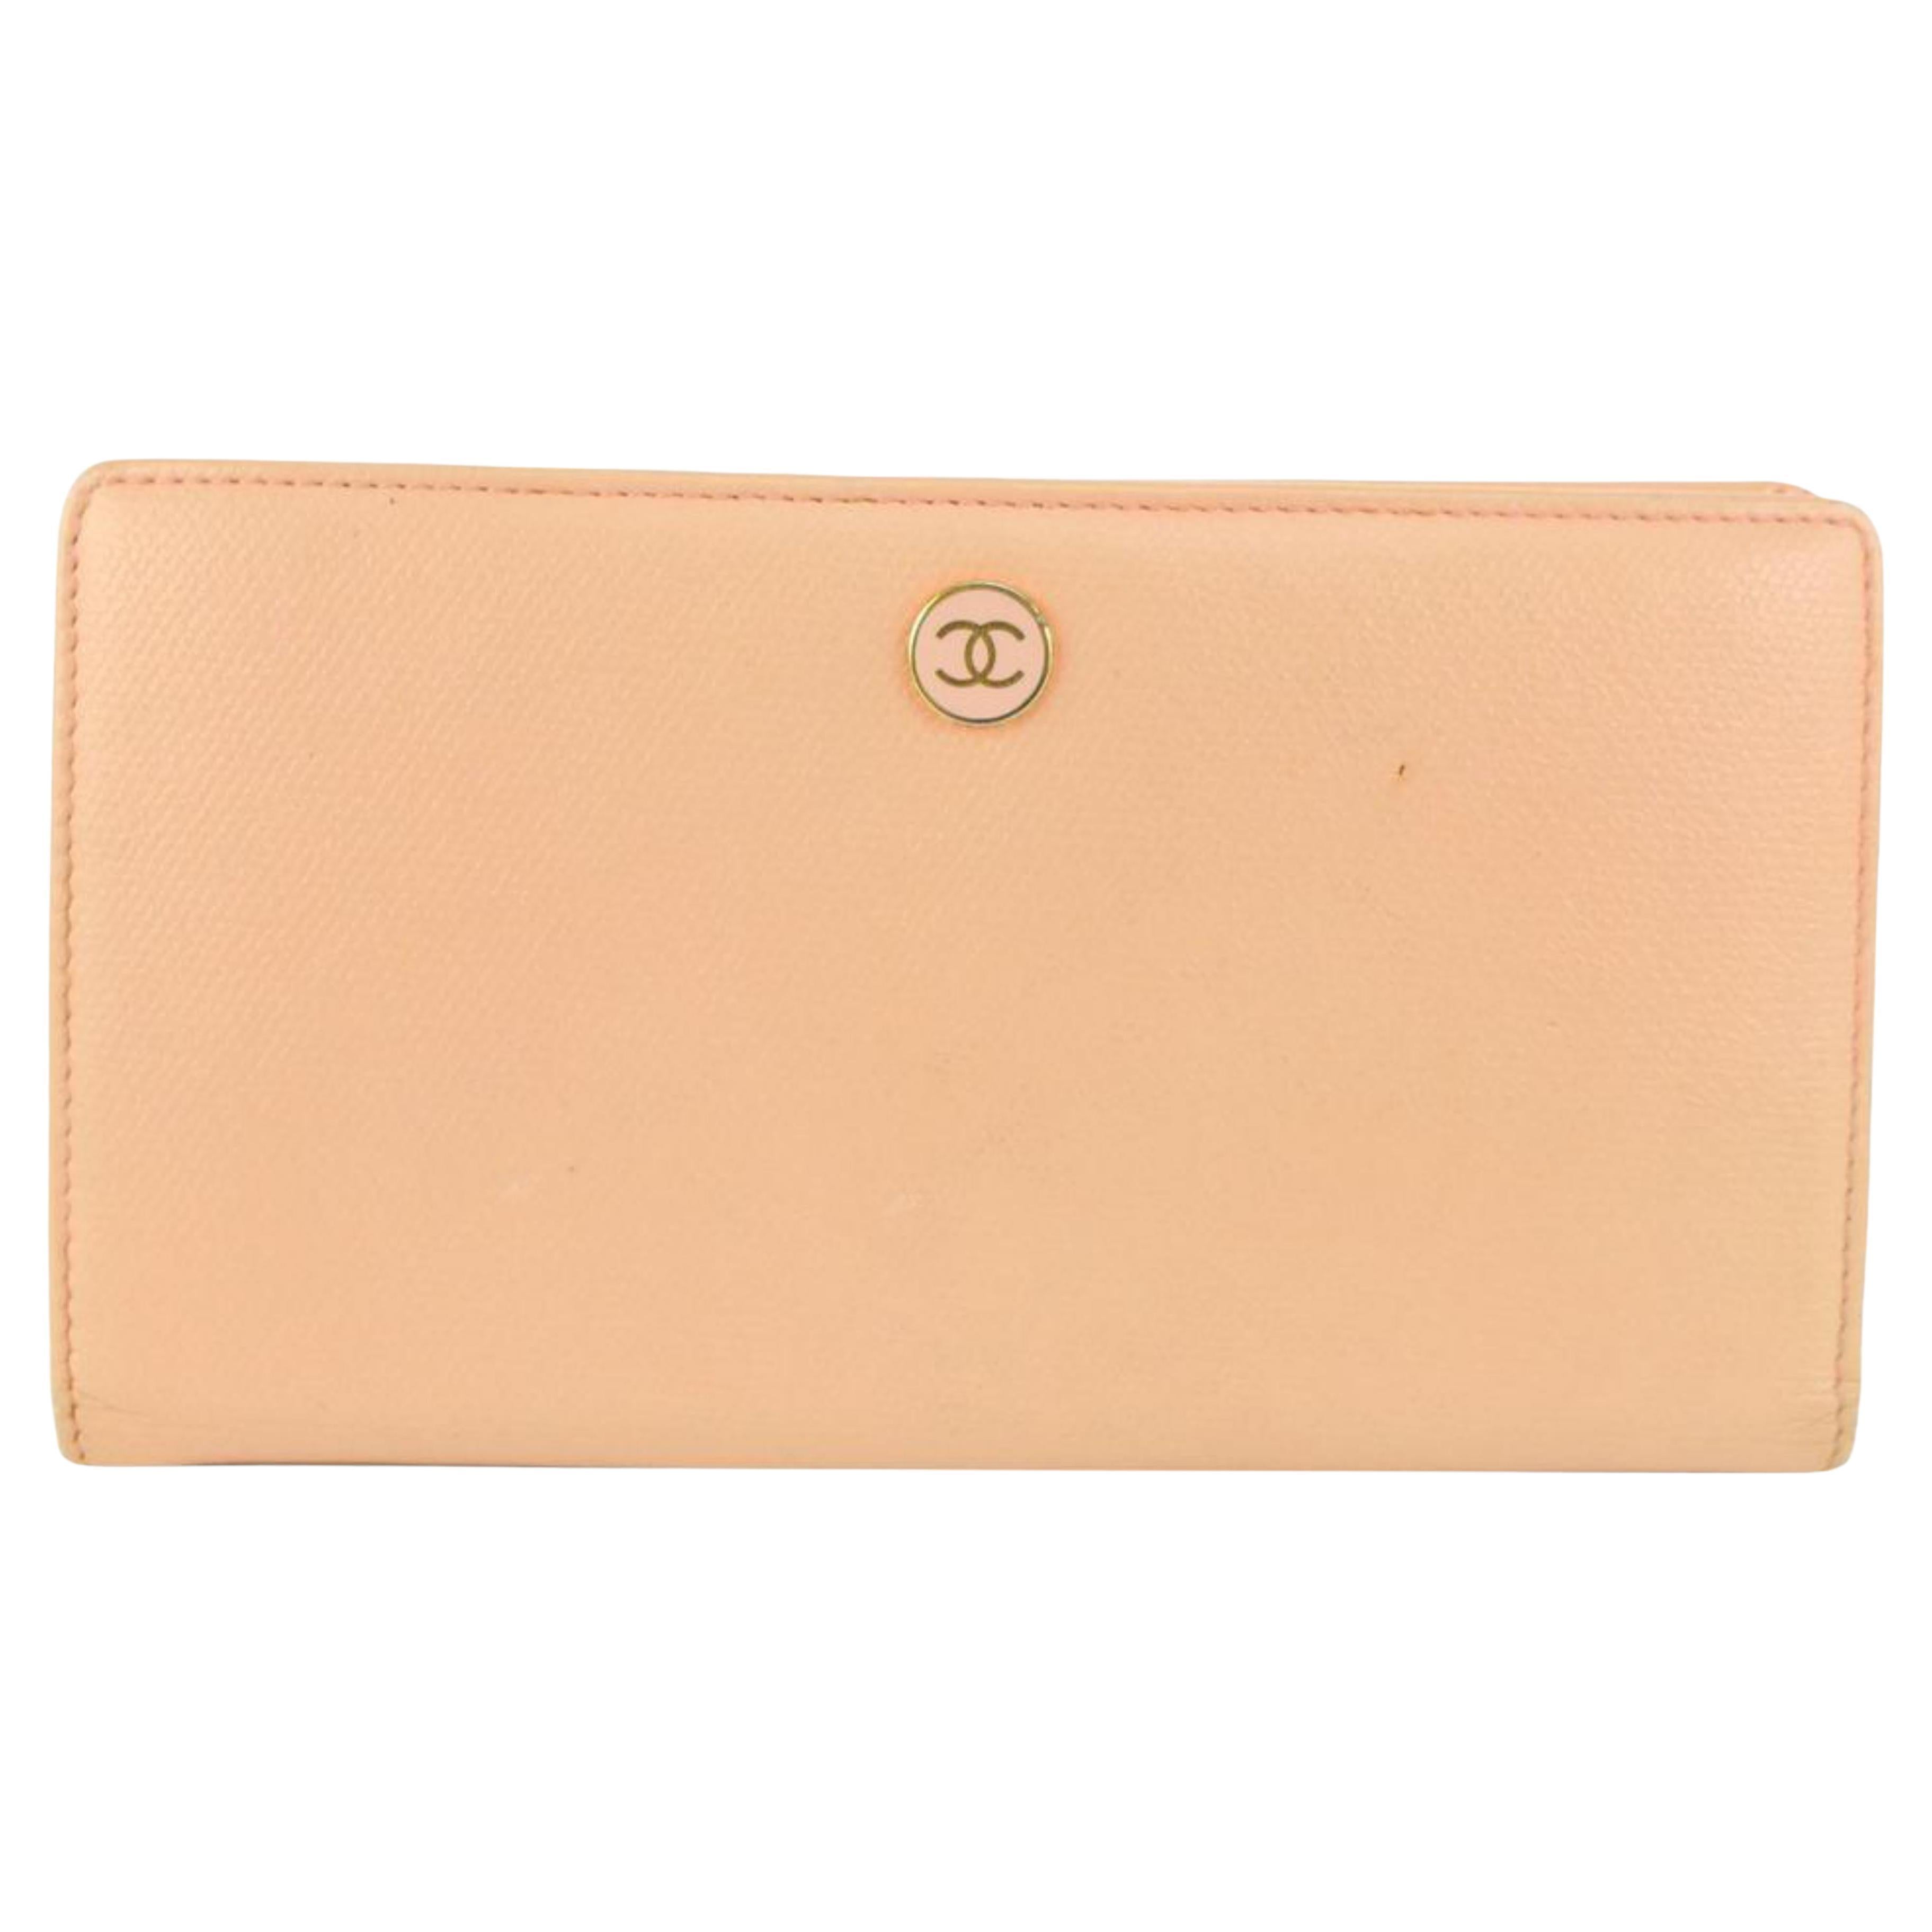 Chanel Pink Calfskin Leather Button Line CC Logo Long Wallet 122c1 For Sale